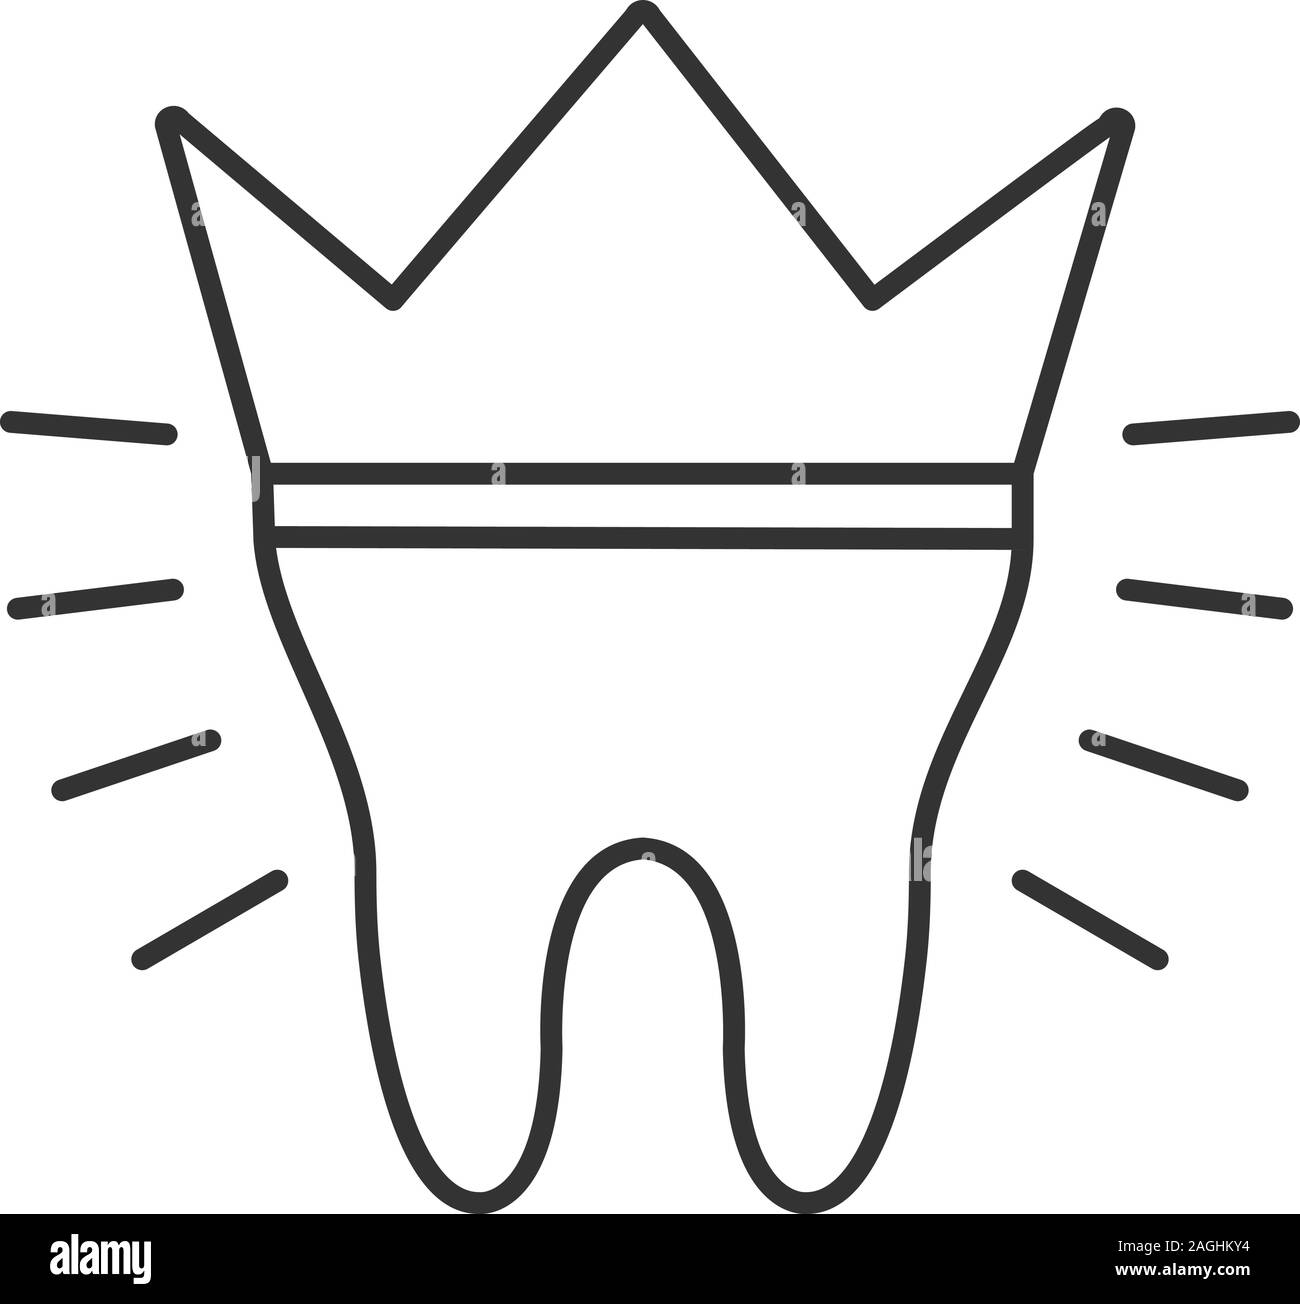 Dental crown linear icon. Thin line illustration. Tooth restoration. Contour symbol. Vector isolated outline drawing Stock Vector